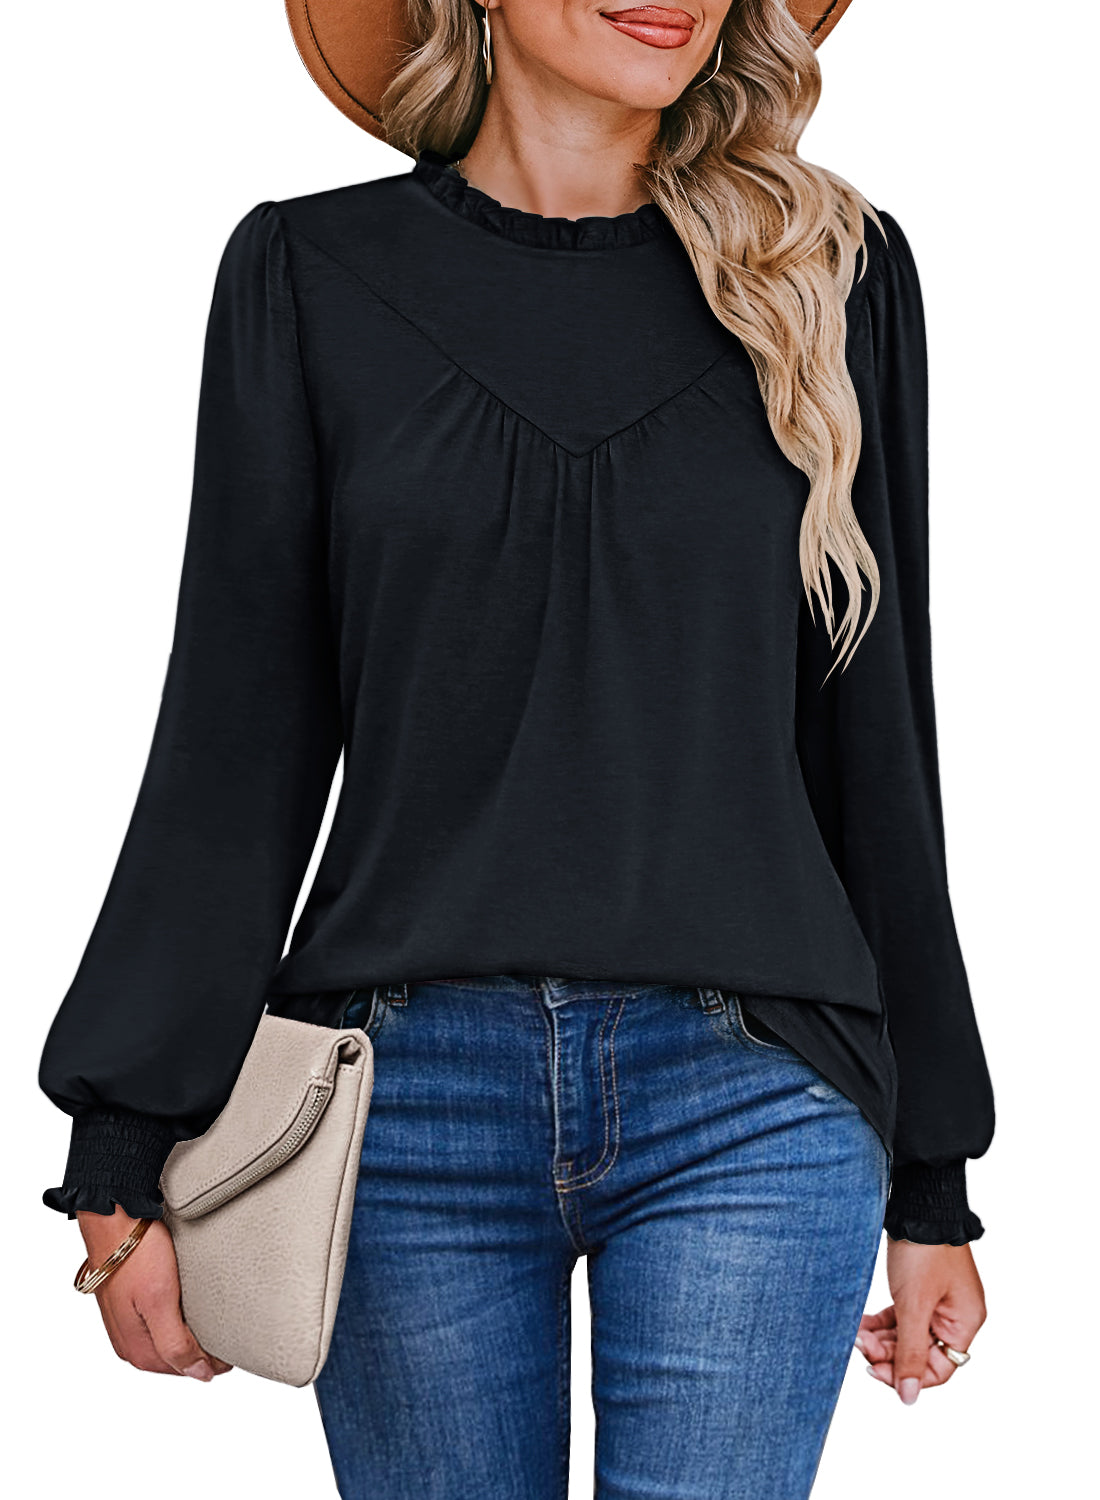 MIHOLL Women's Casual Sweet & Cute Loose Shirt Balloon Sleeve Blouse Top ( Black, Small) at  Women's Clothing store